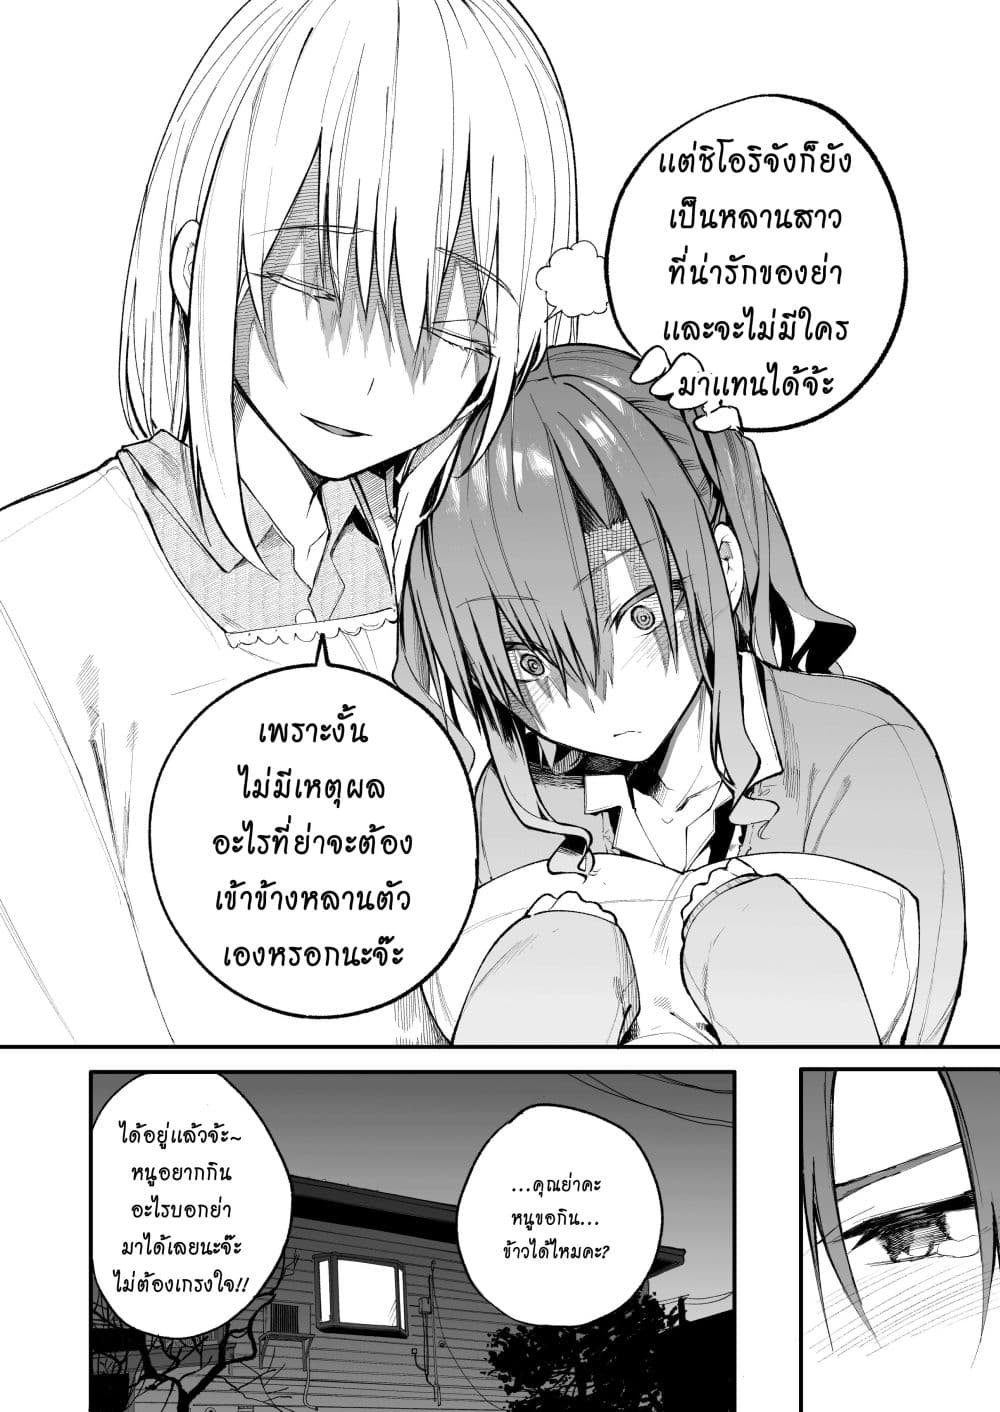 A Story About A Grampa and Granma Returned Back to their Youth คู่รักวัยดึกหวนคืนวัยหวาน 26-26